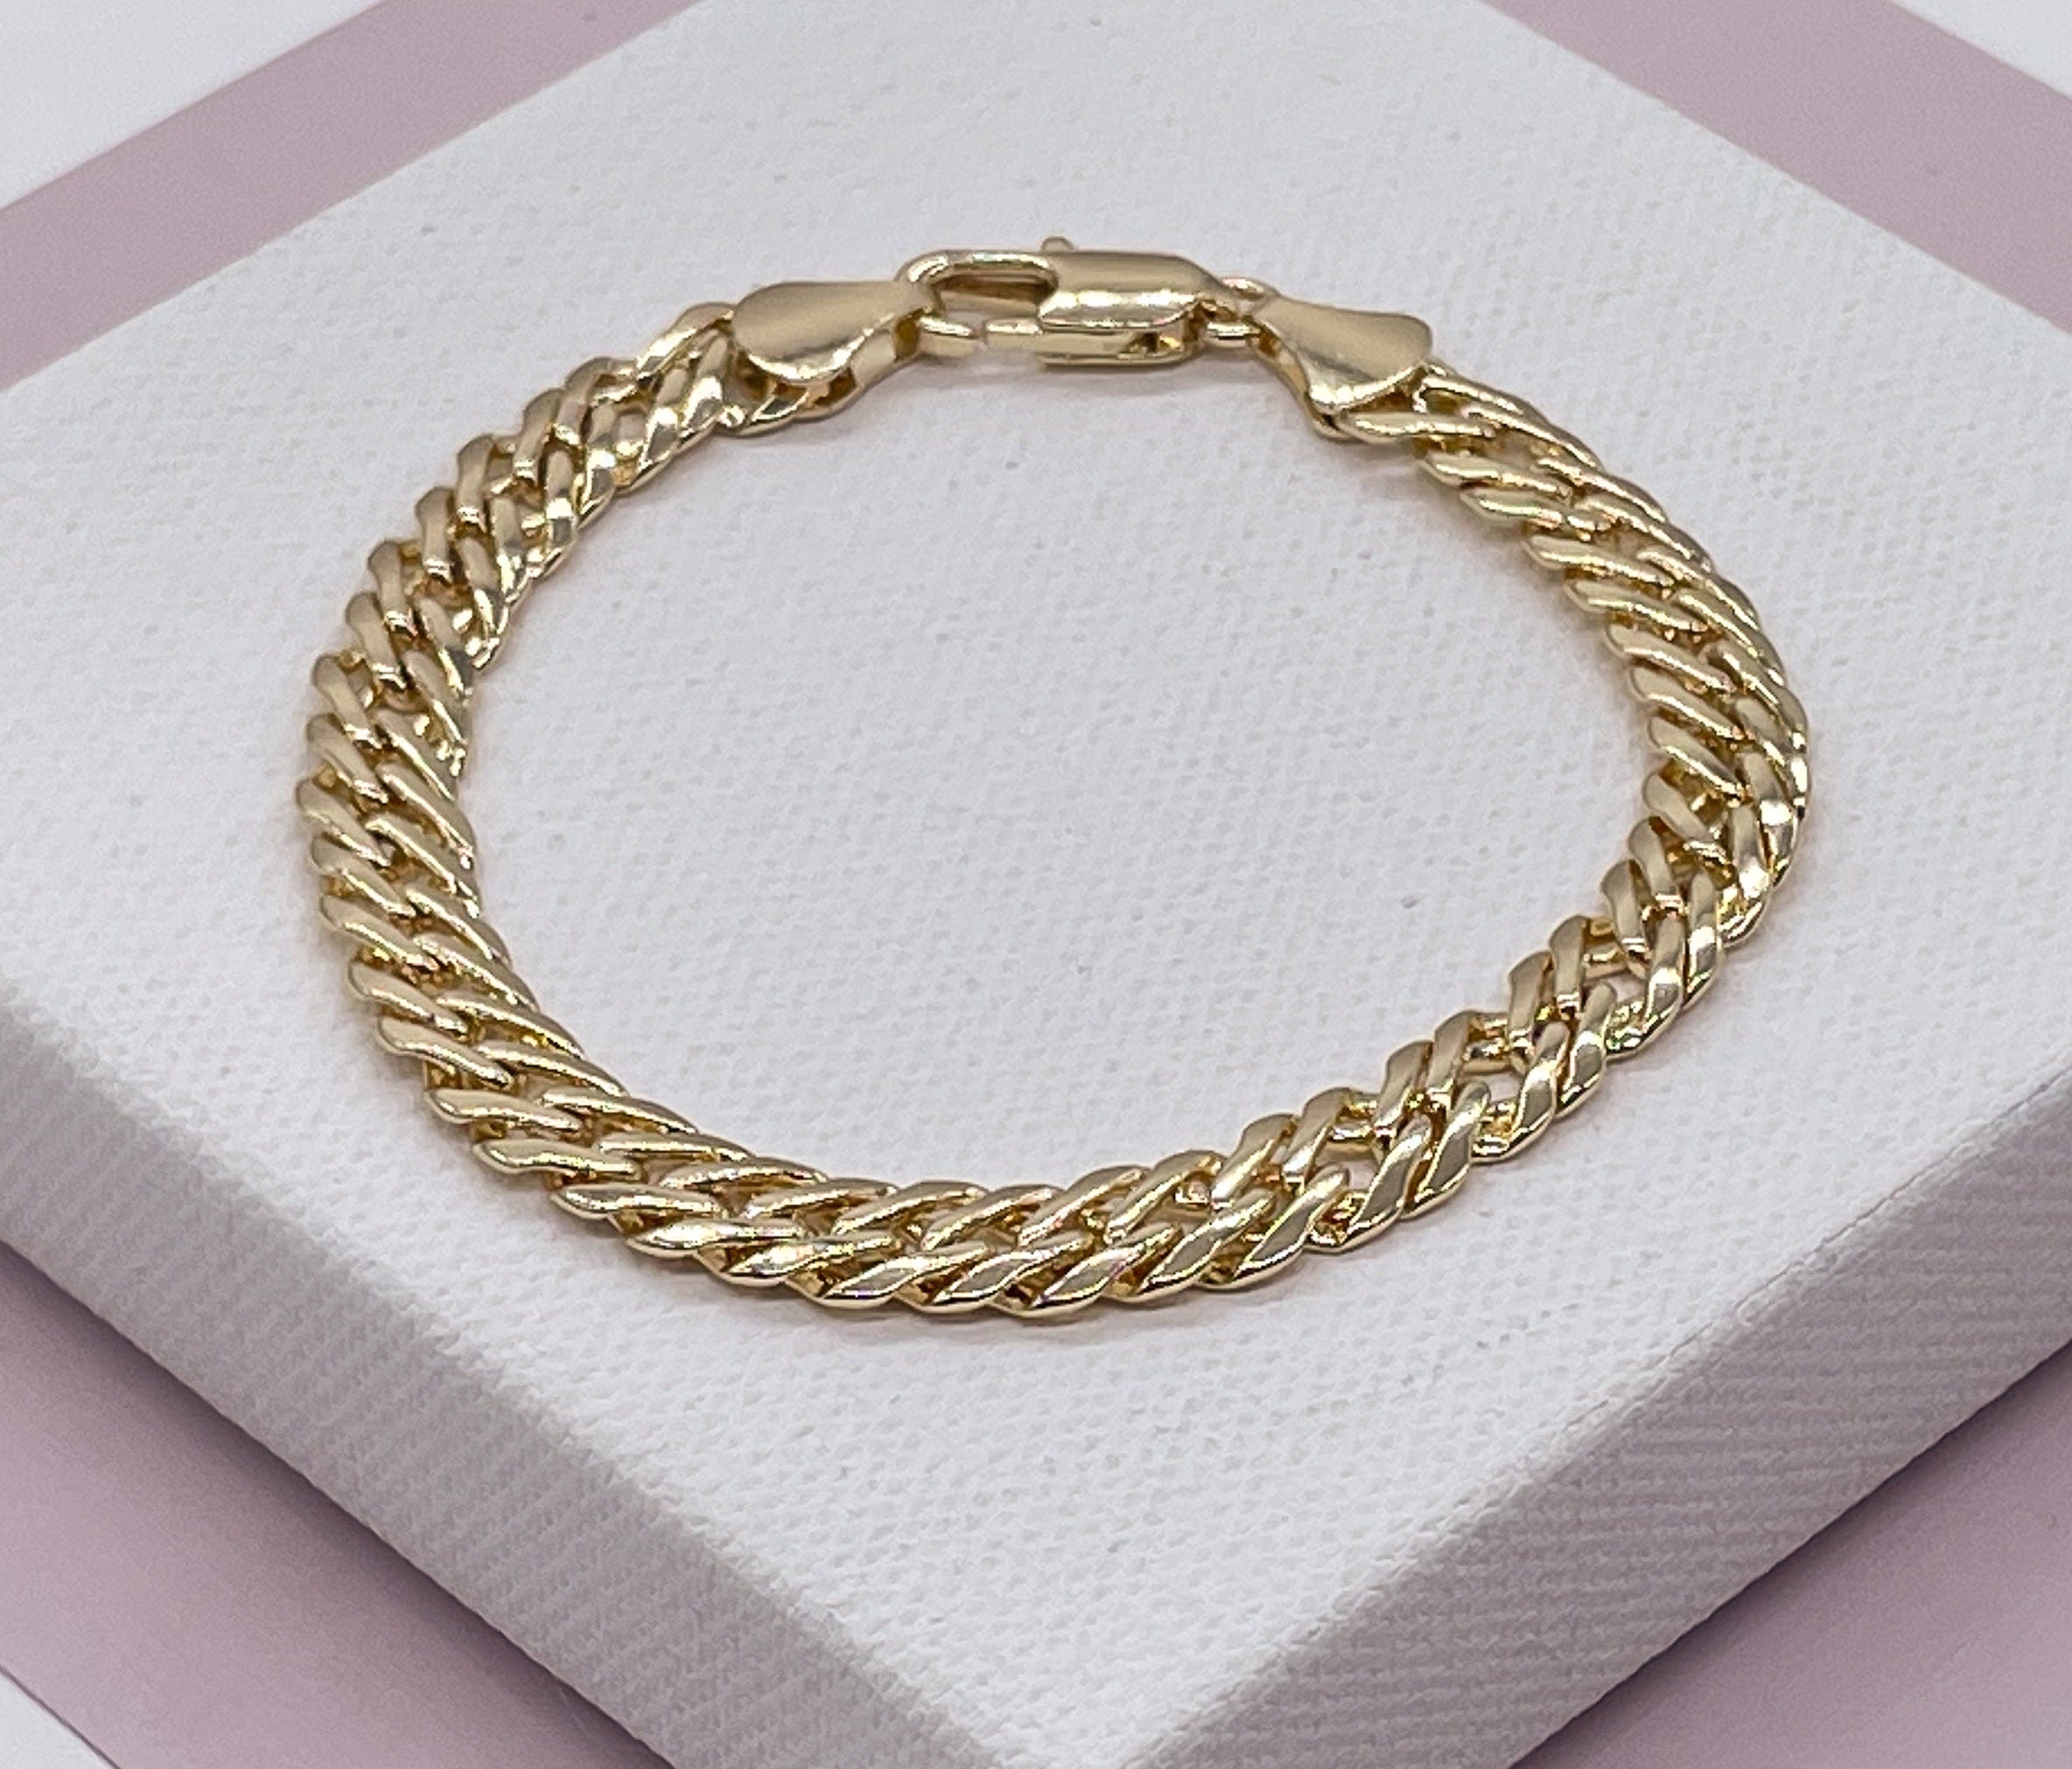 Steeltime 18K Gold Over Stainless Steel 8 1/2 Inch Solid Cuban Link Bracelet  - JCPenney